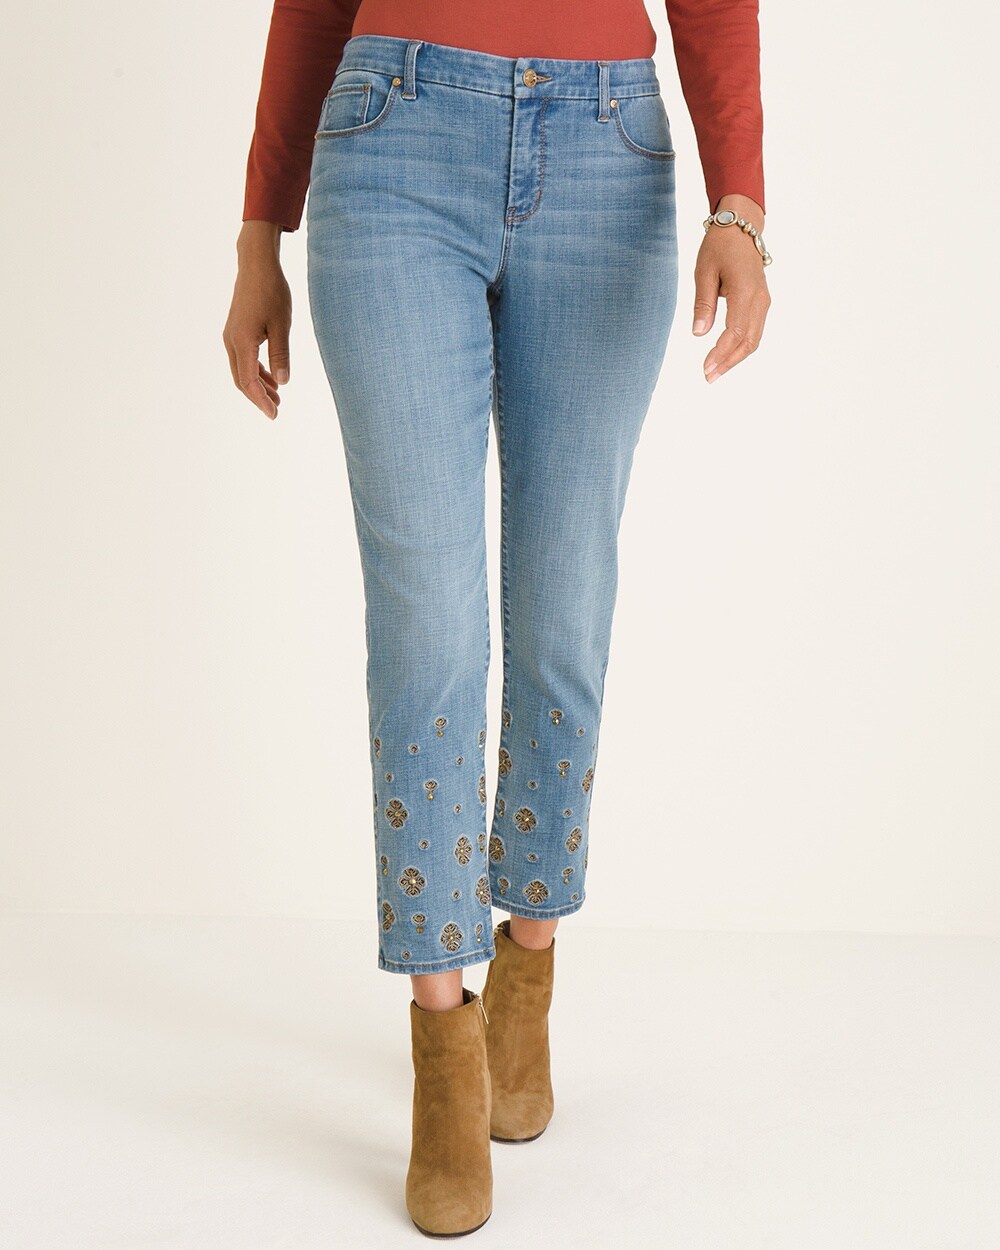 So Slimming Foulard Embroidered Girlfriend Ankle Jeans